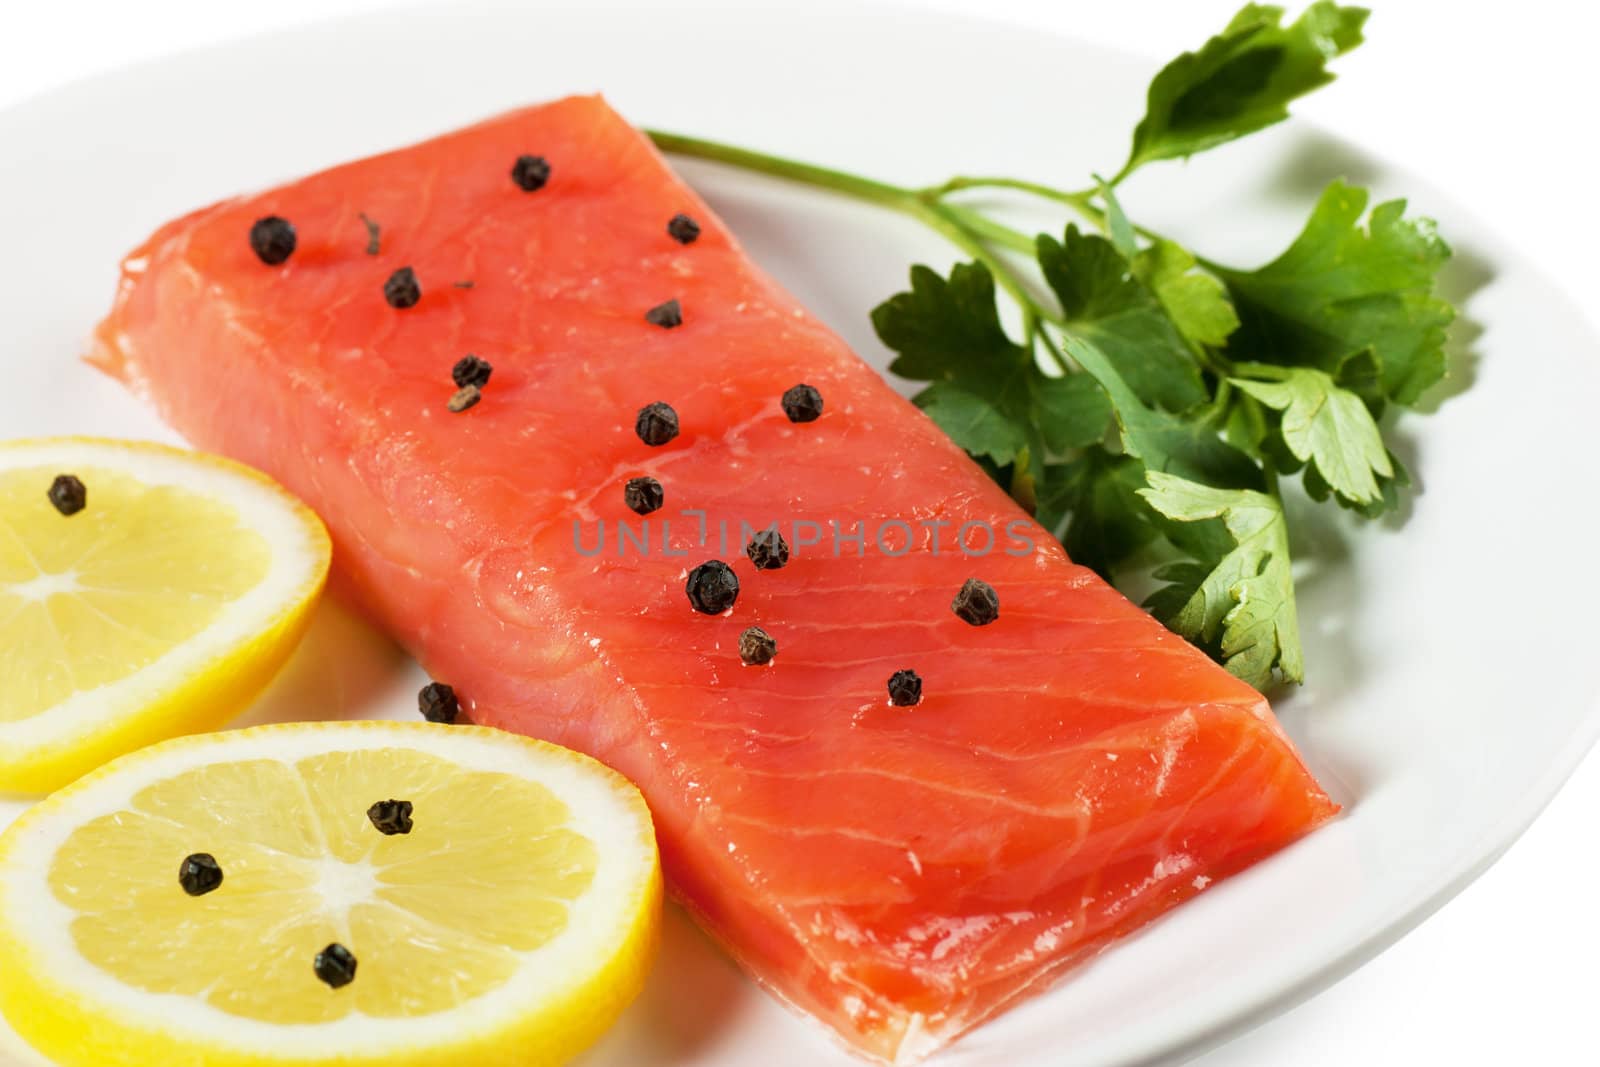 Closeup view of fresh salmon with parsley and lemon on a white plate